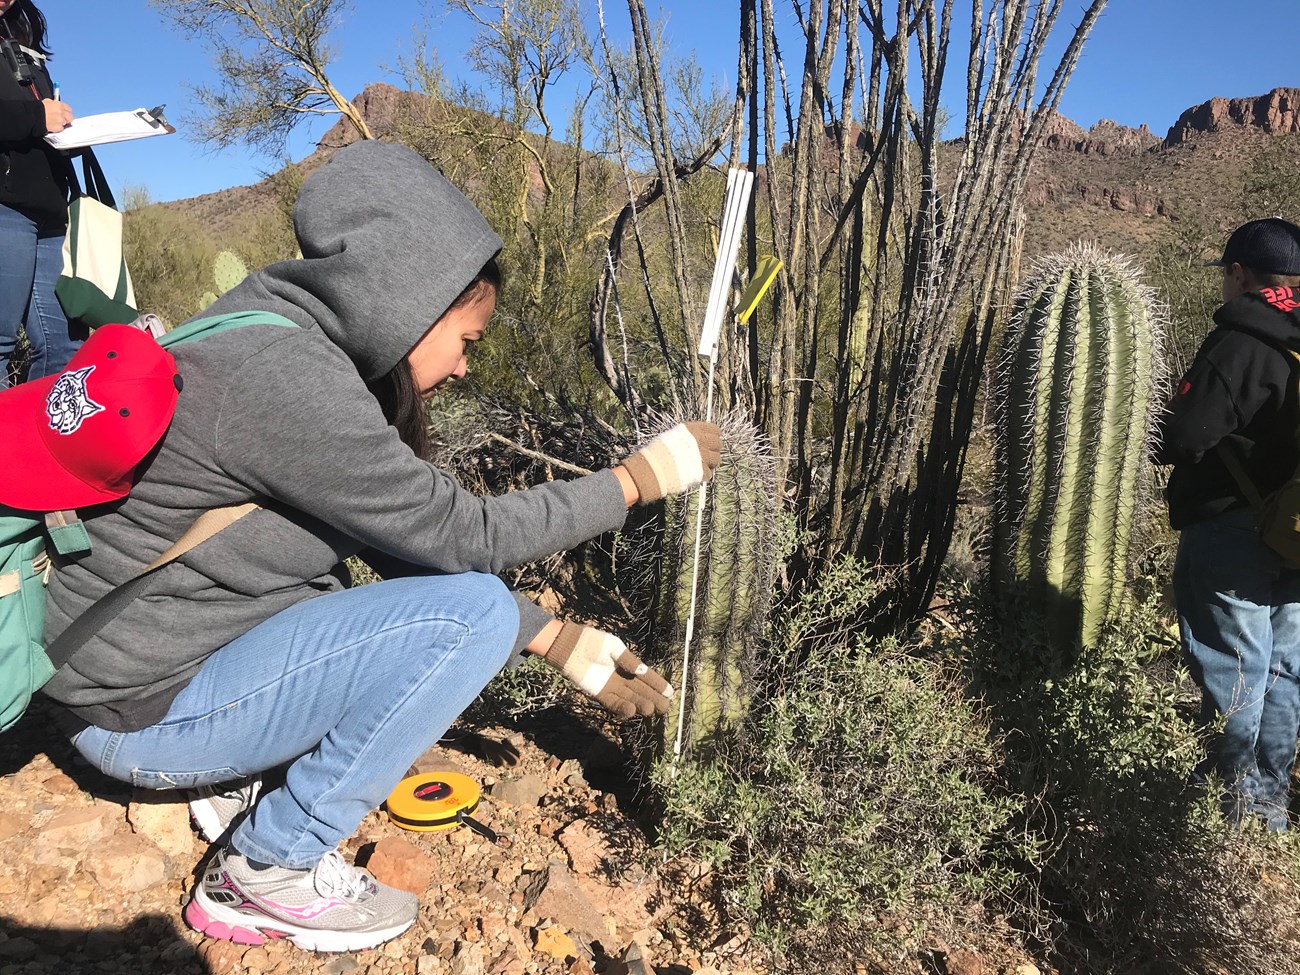 A woman squatting down next to a short saguaro and measuring its height.